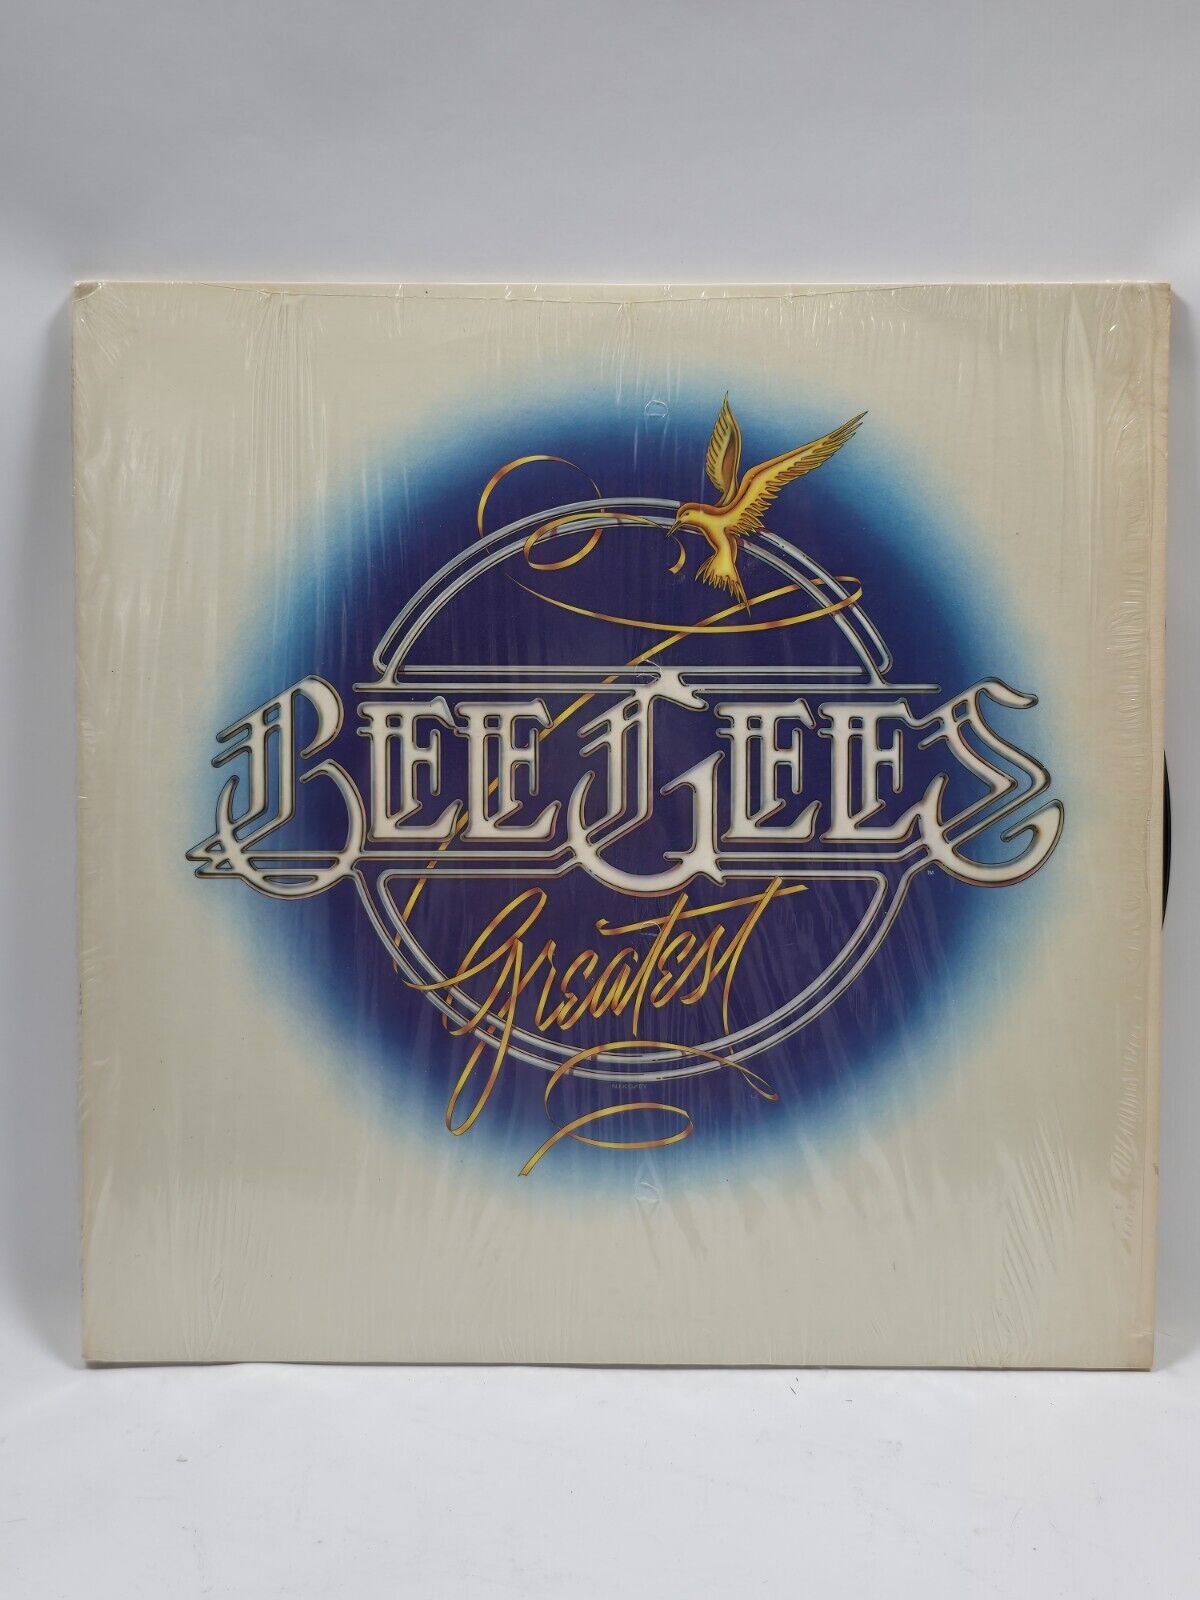 BEE GEES GREATEST HITS  1979 ONLY ONE RECORD.  MINT CONDITION. RS-2-4200